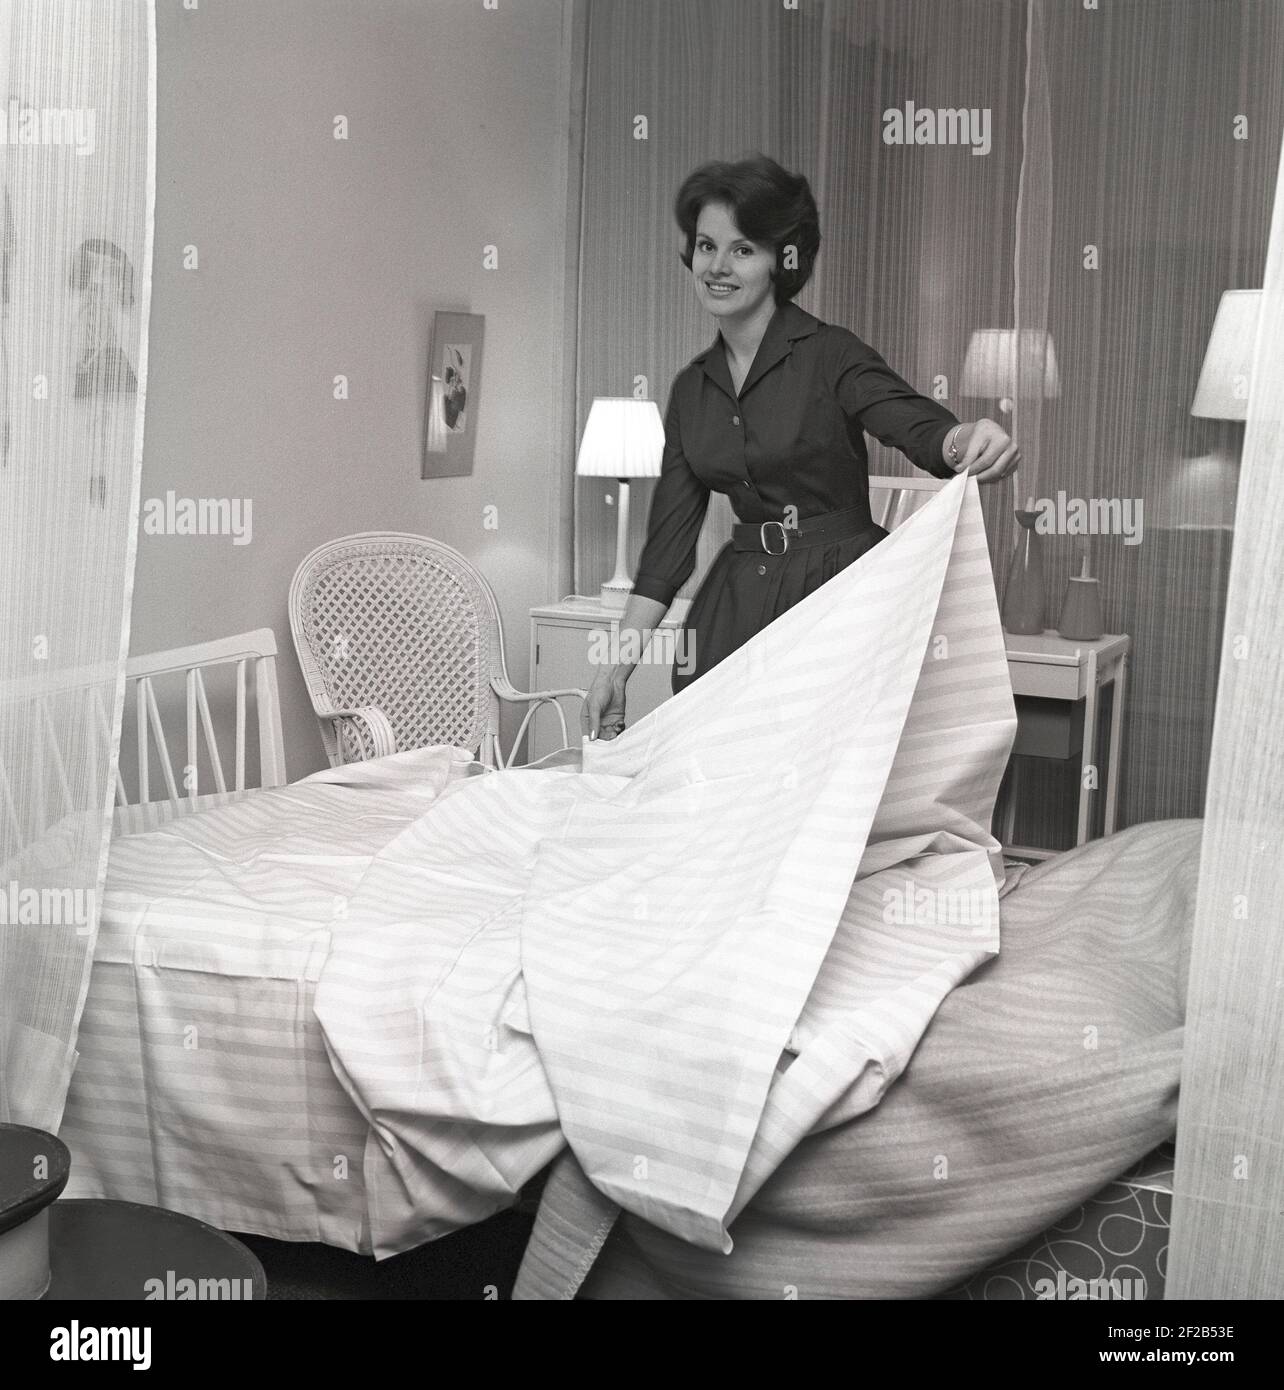 In the 1960s. A woman is making her bed with fresh sheets. Sweden 1960 ref CS12-5 Stock Photo